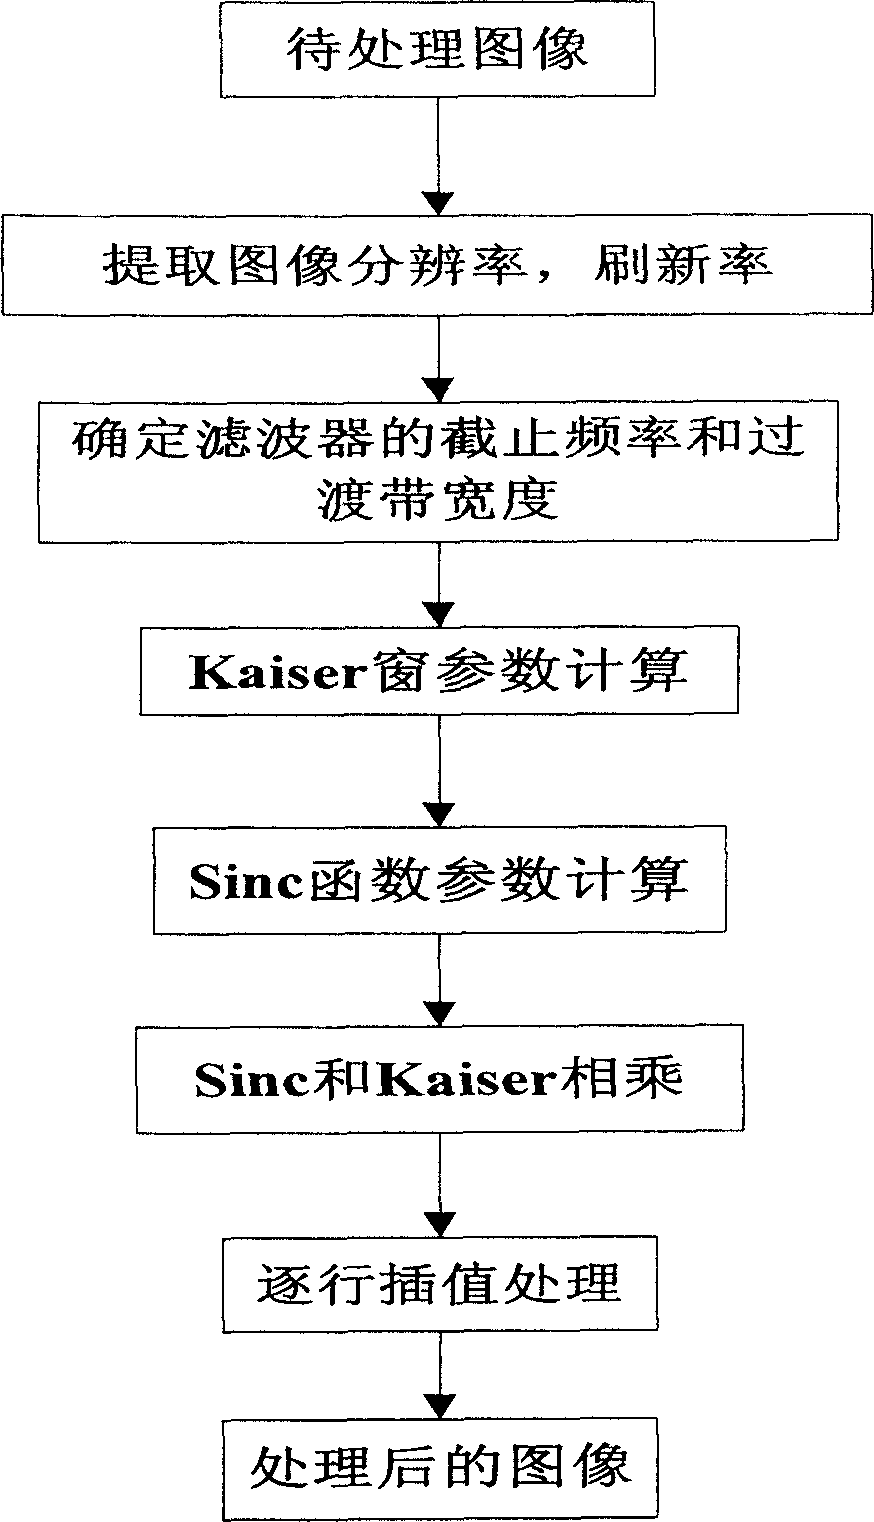 Window added interpolation method for Sinc function in image scaling device